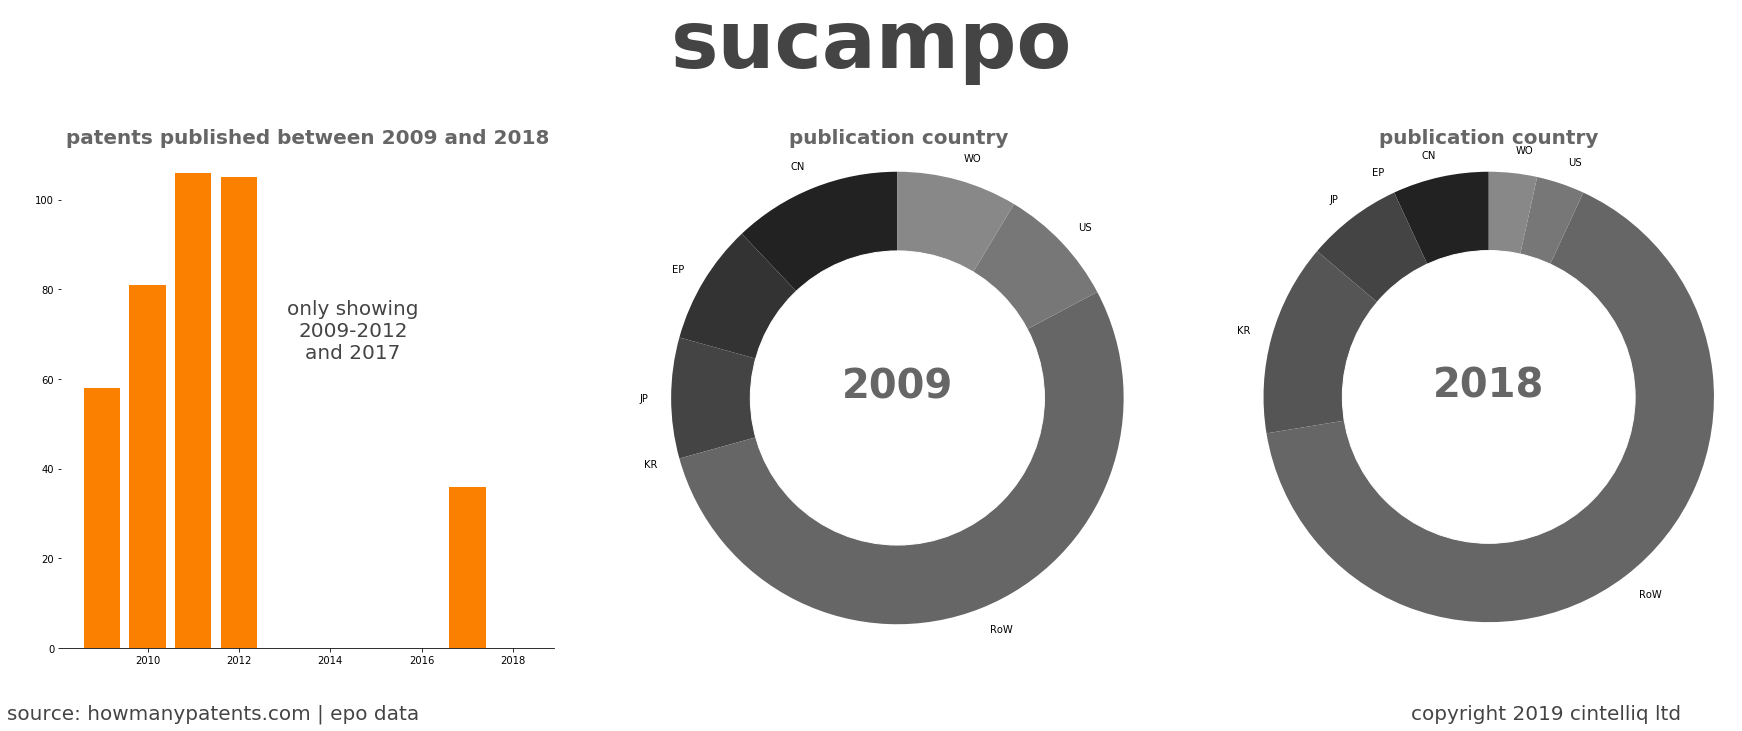 summary of patents for Sucampo